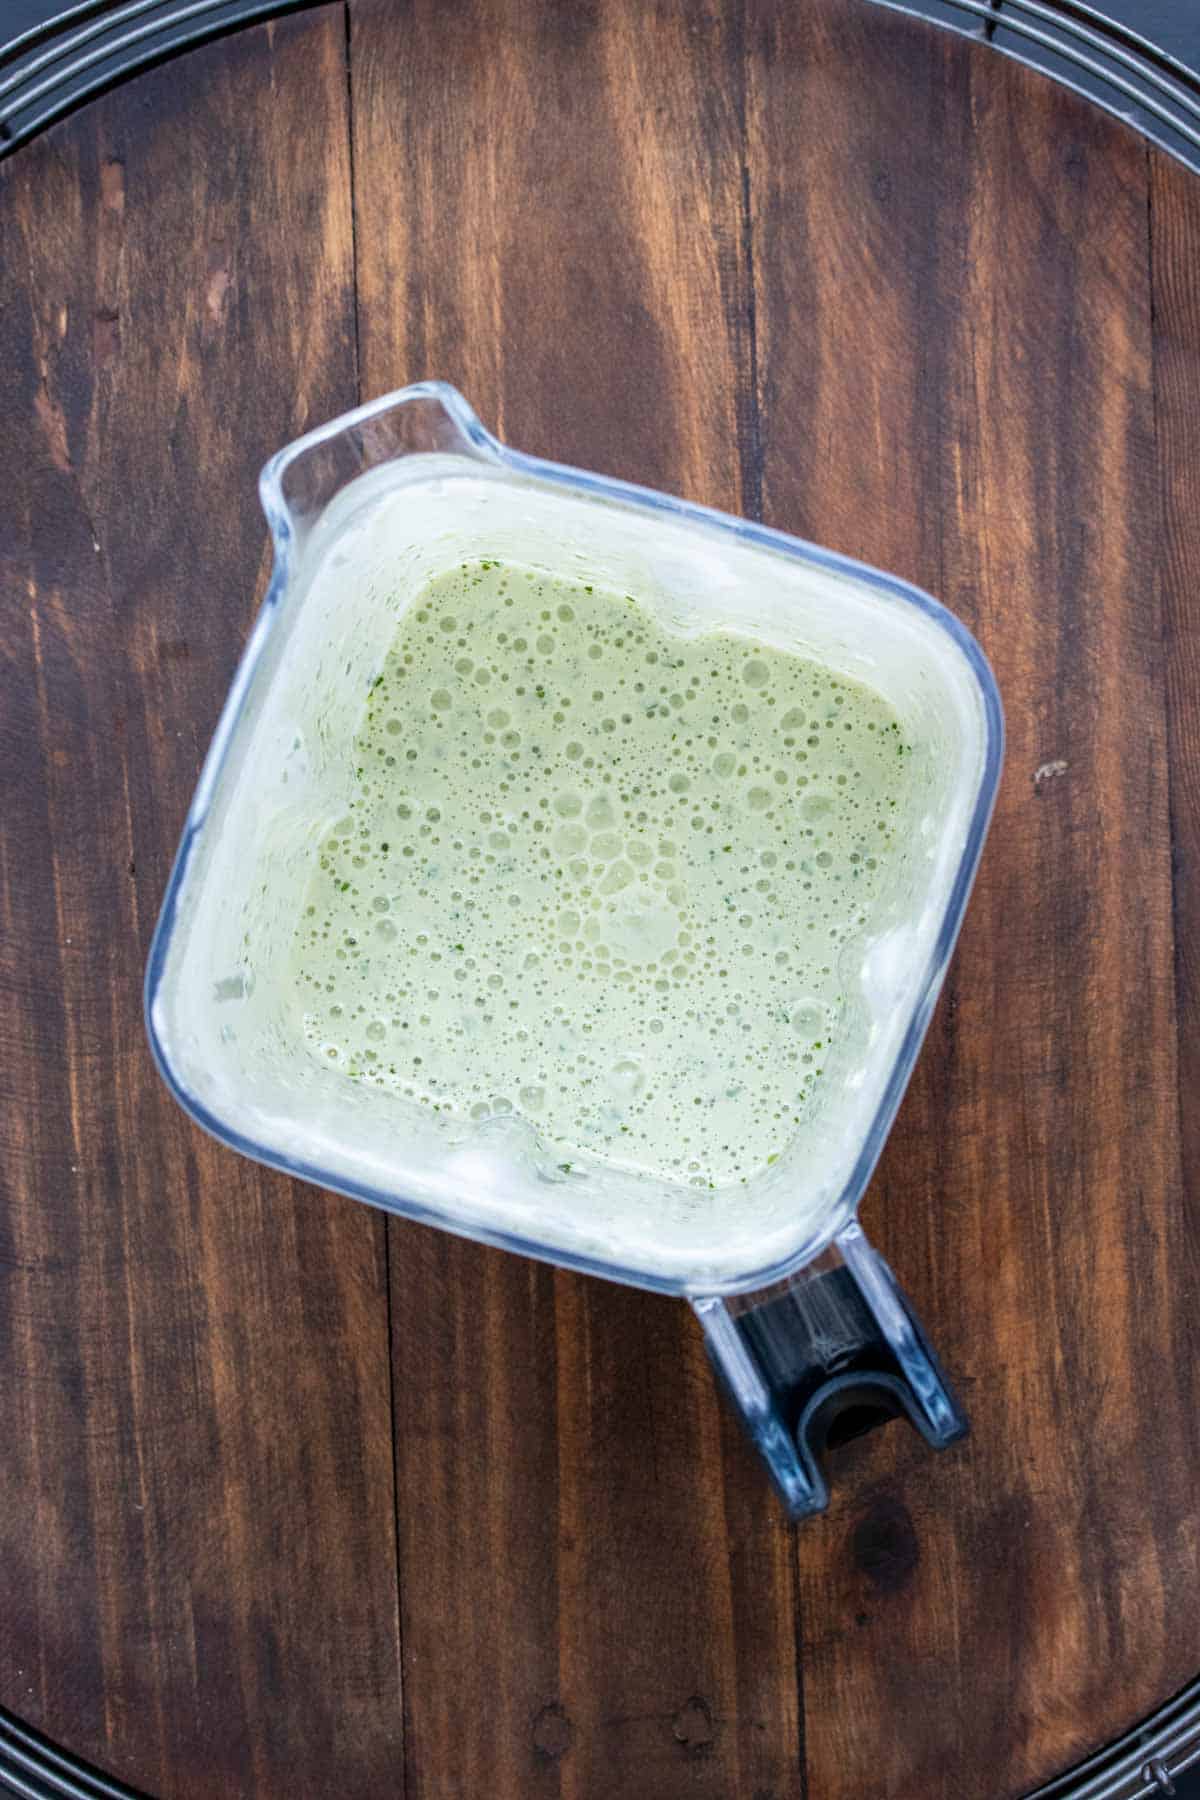 Top view of a blender with a light green creamy sauce